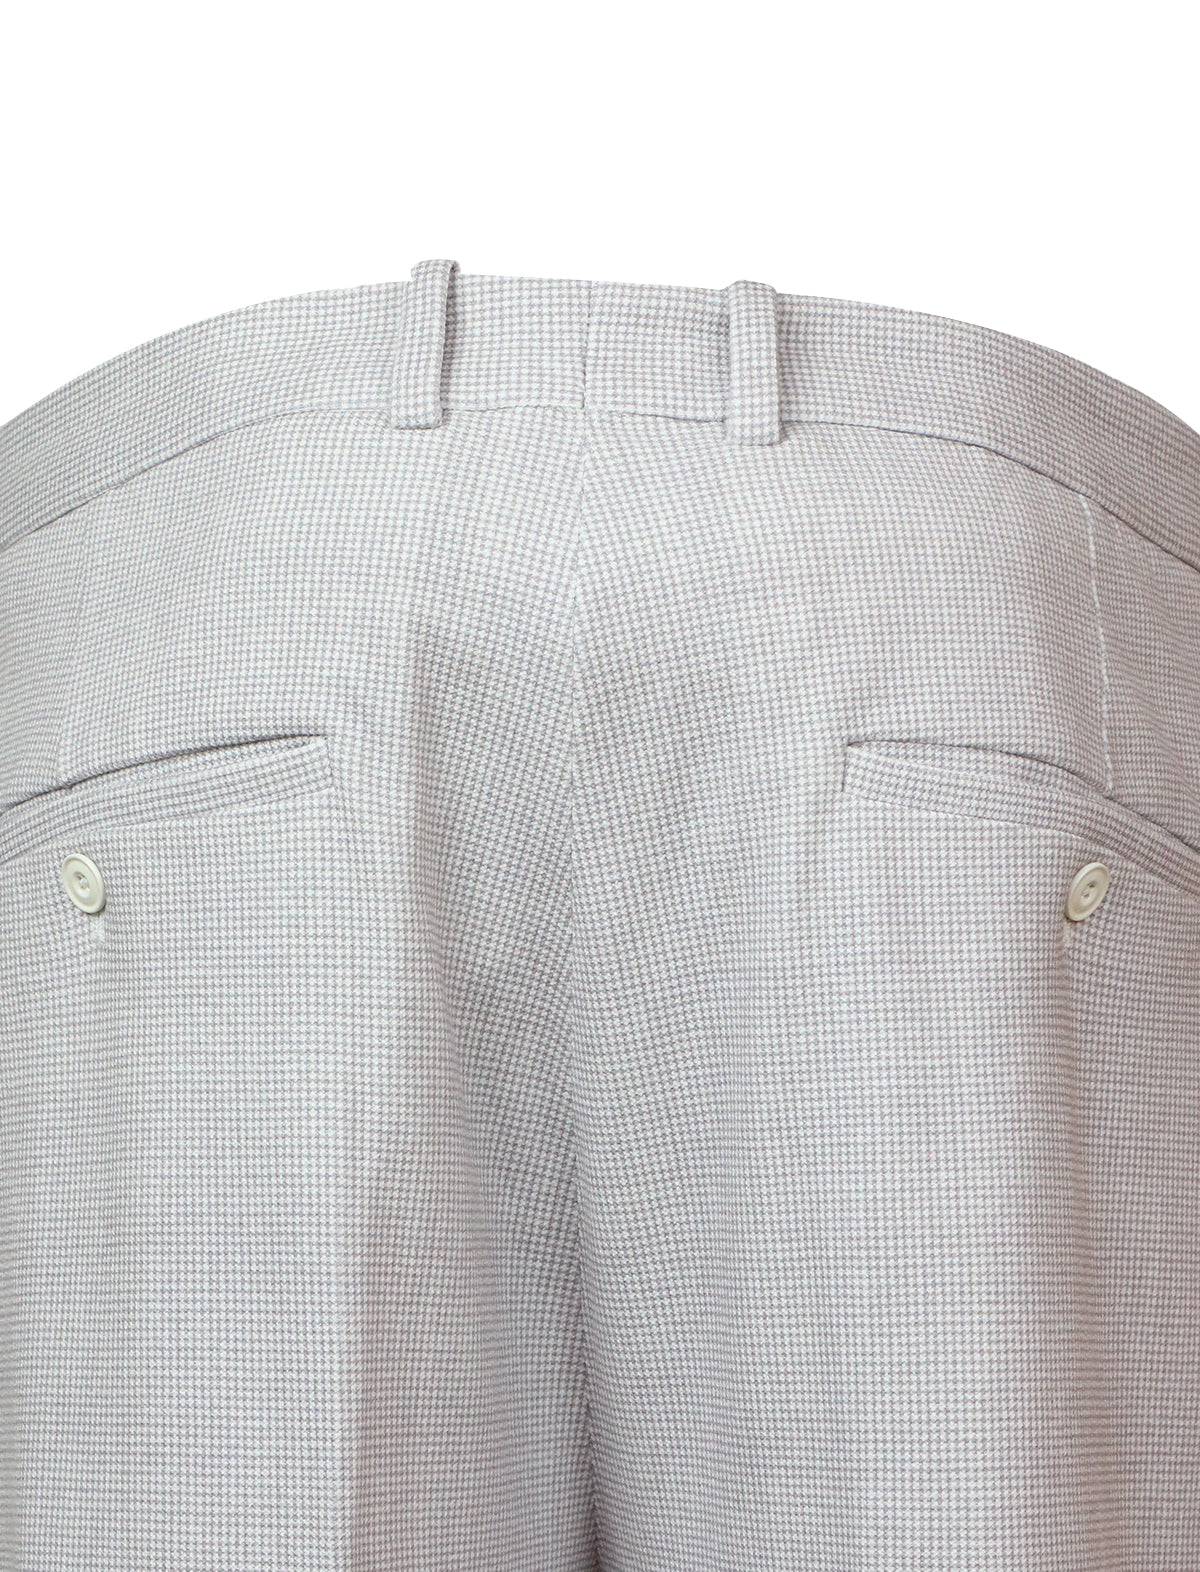 CIRCOLO 1901 Tailored Textured Pants in Light Grey